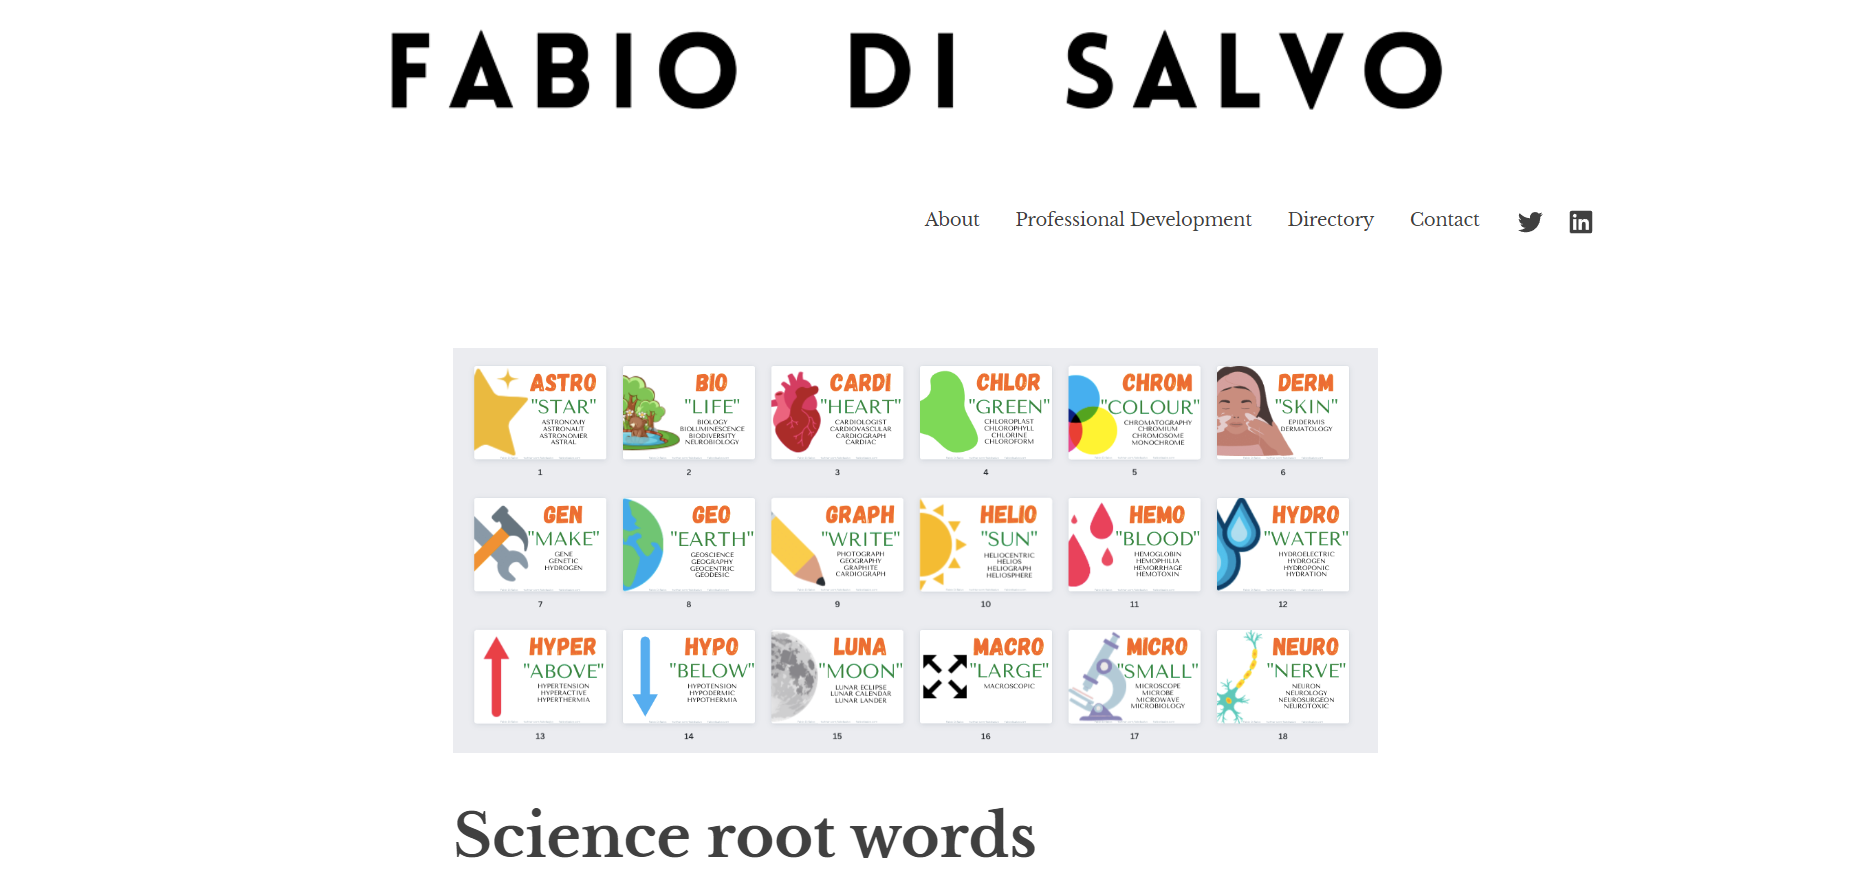 Science root words from Fabio Di Salvo.